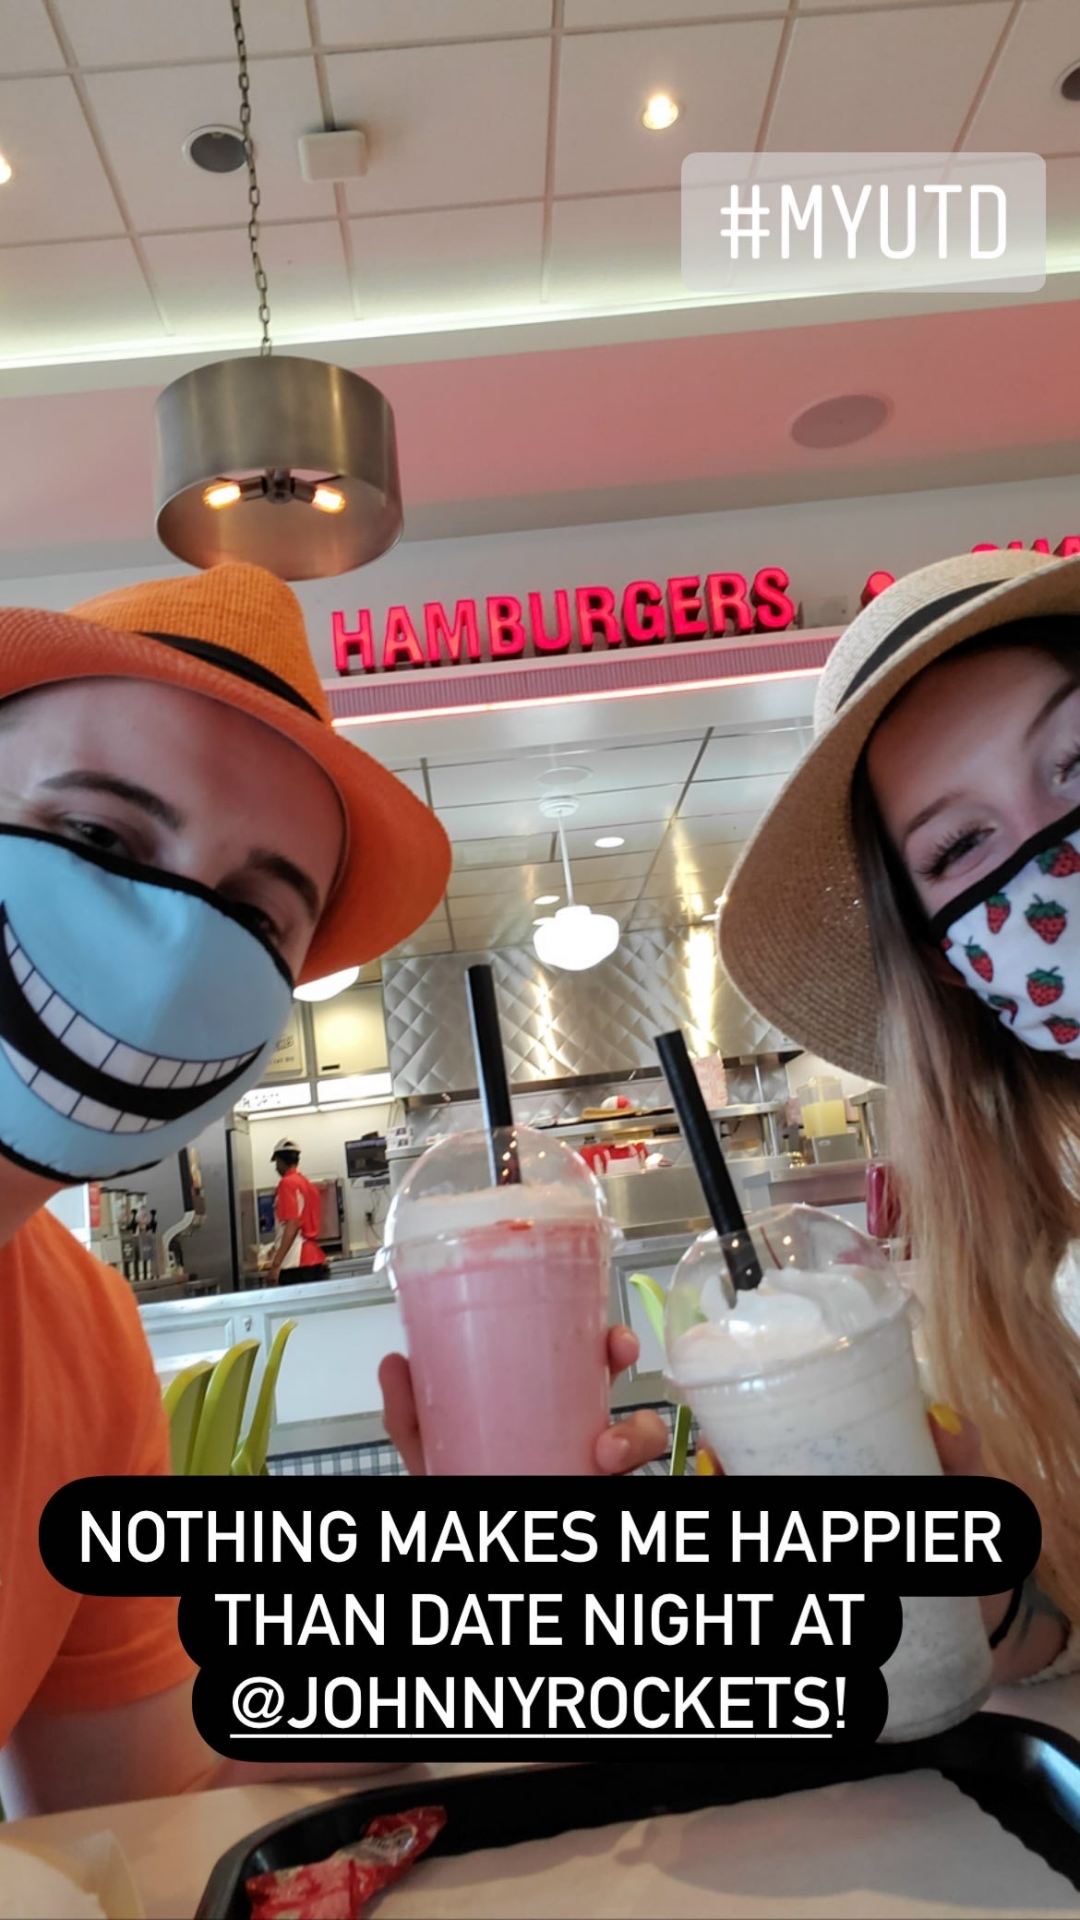 Troy and Troys date wearing hats and masks pose with milk shakes.